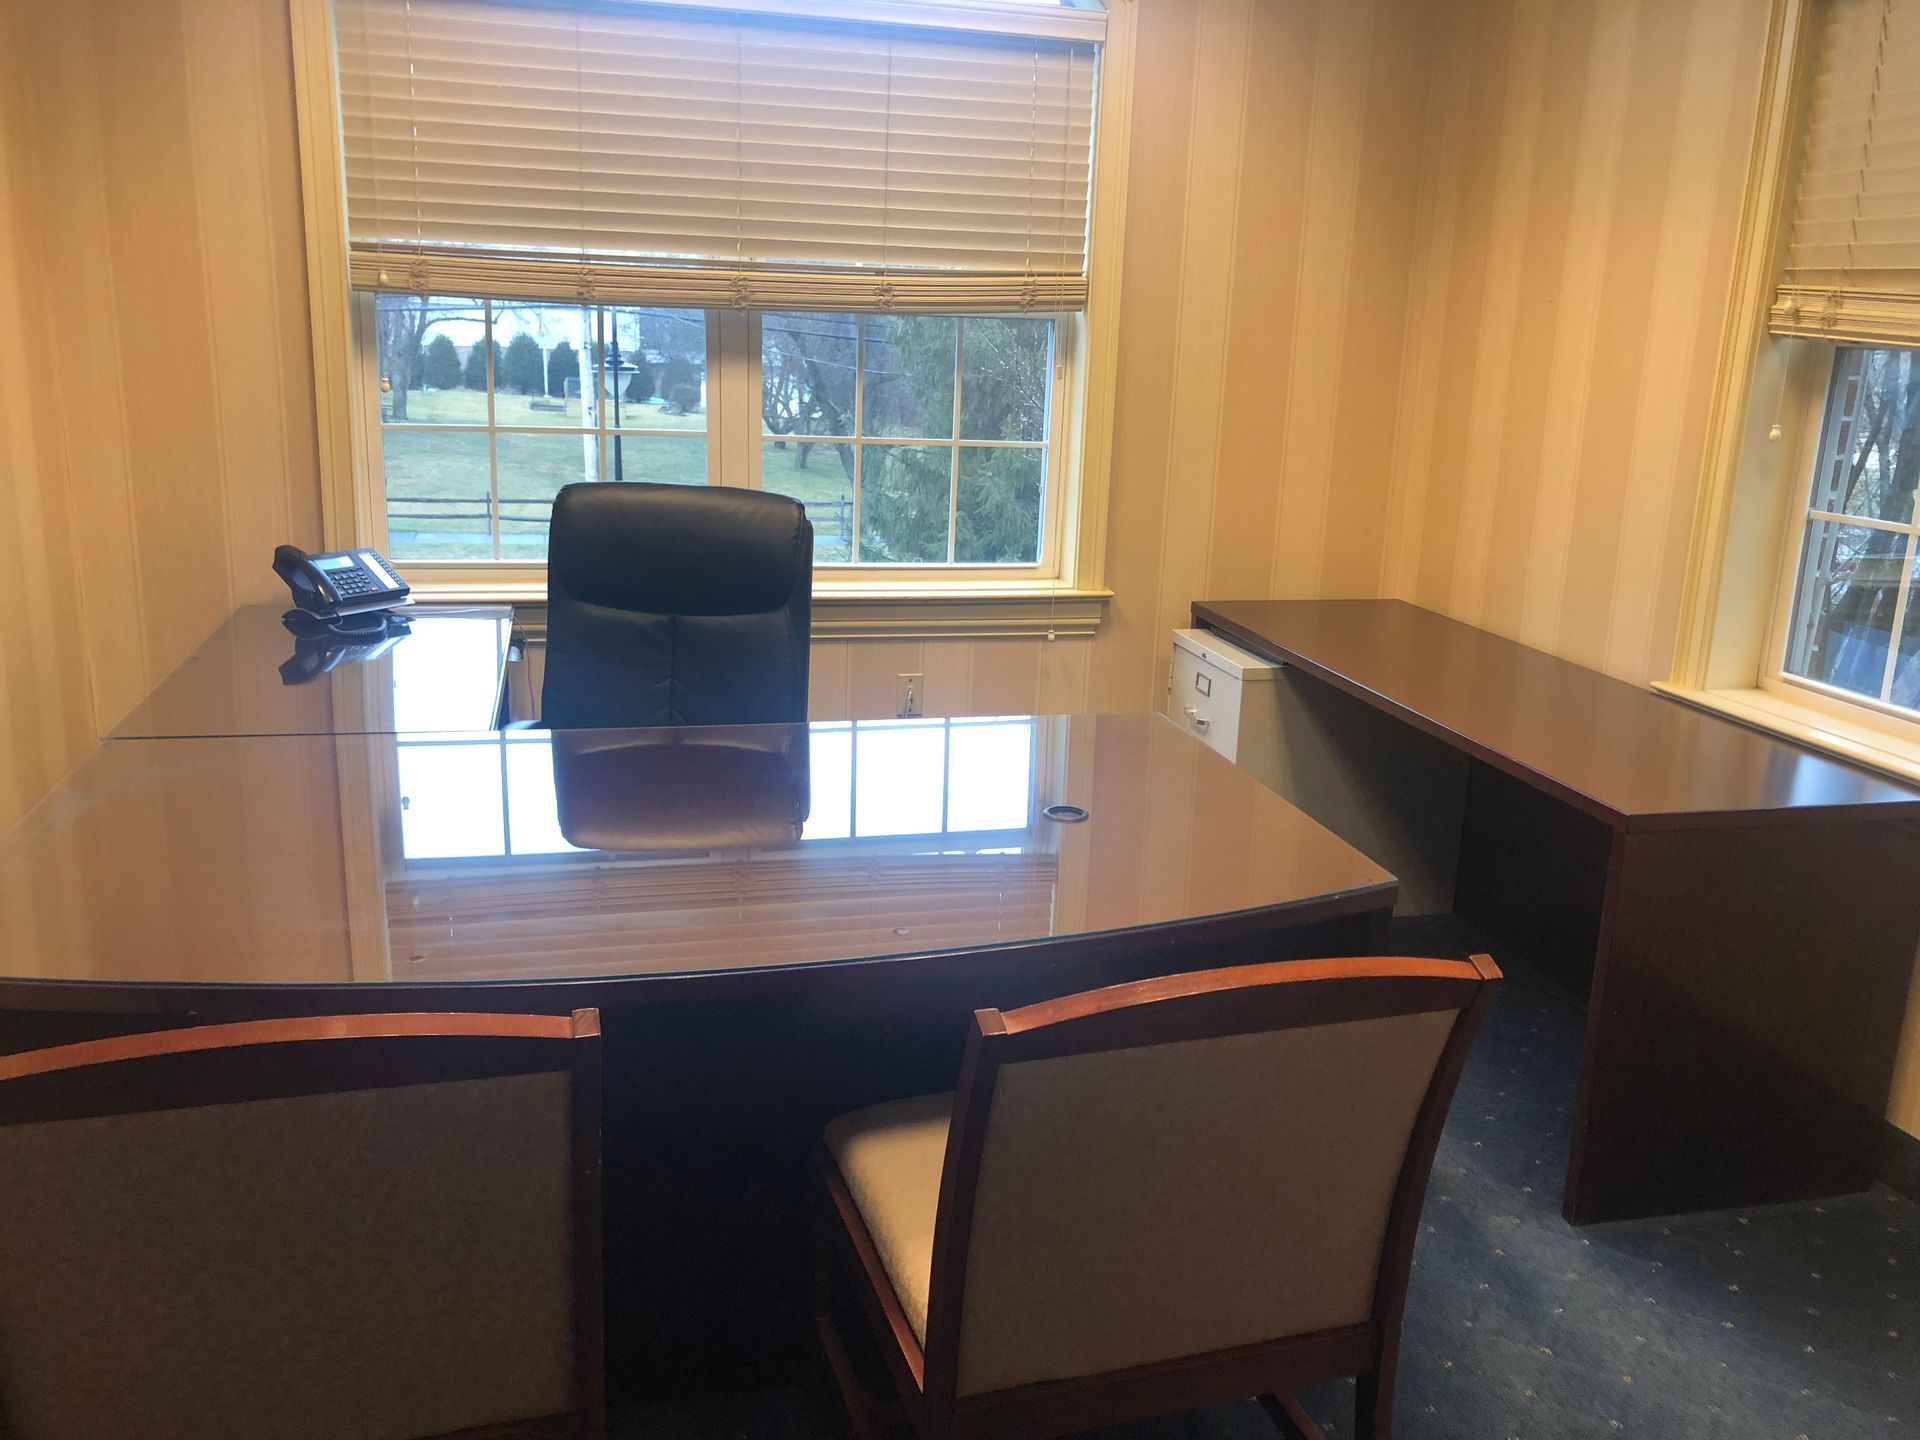 Conference Room - Clifton, NJ - Evergreen Commercial Real Estate Brokers Inc